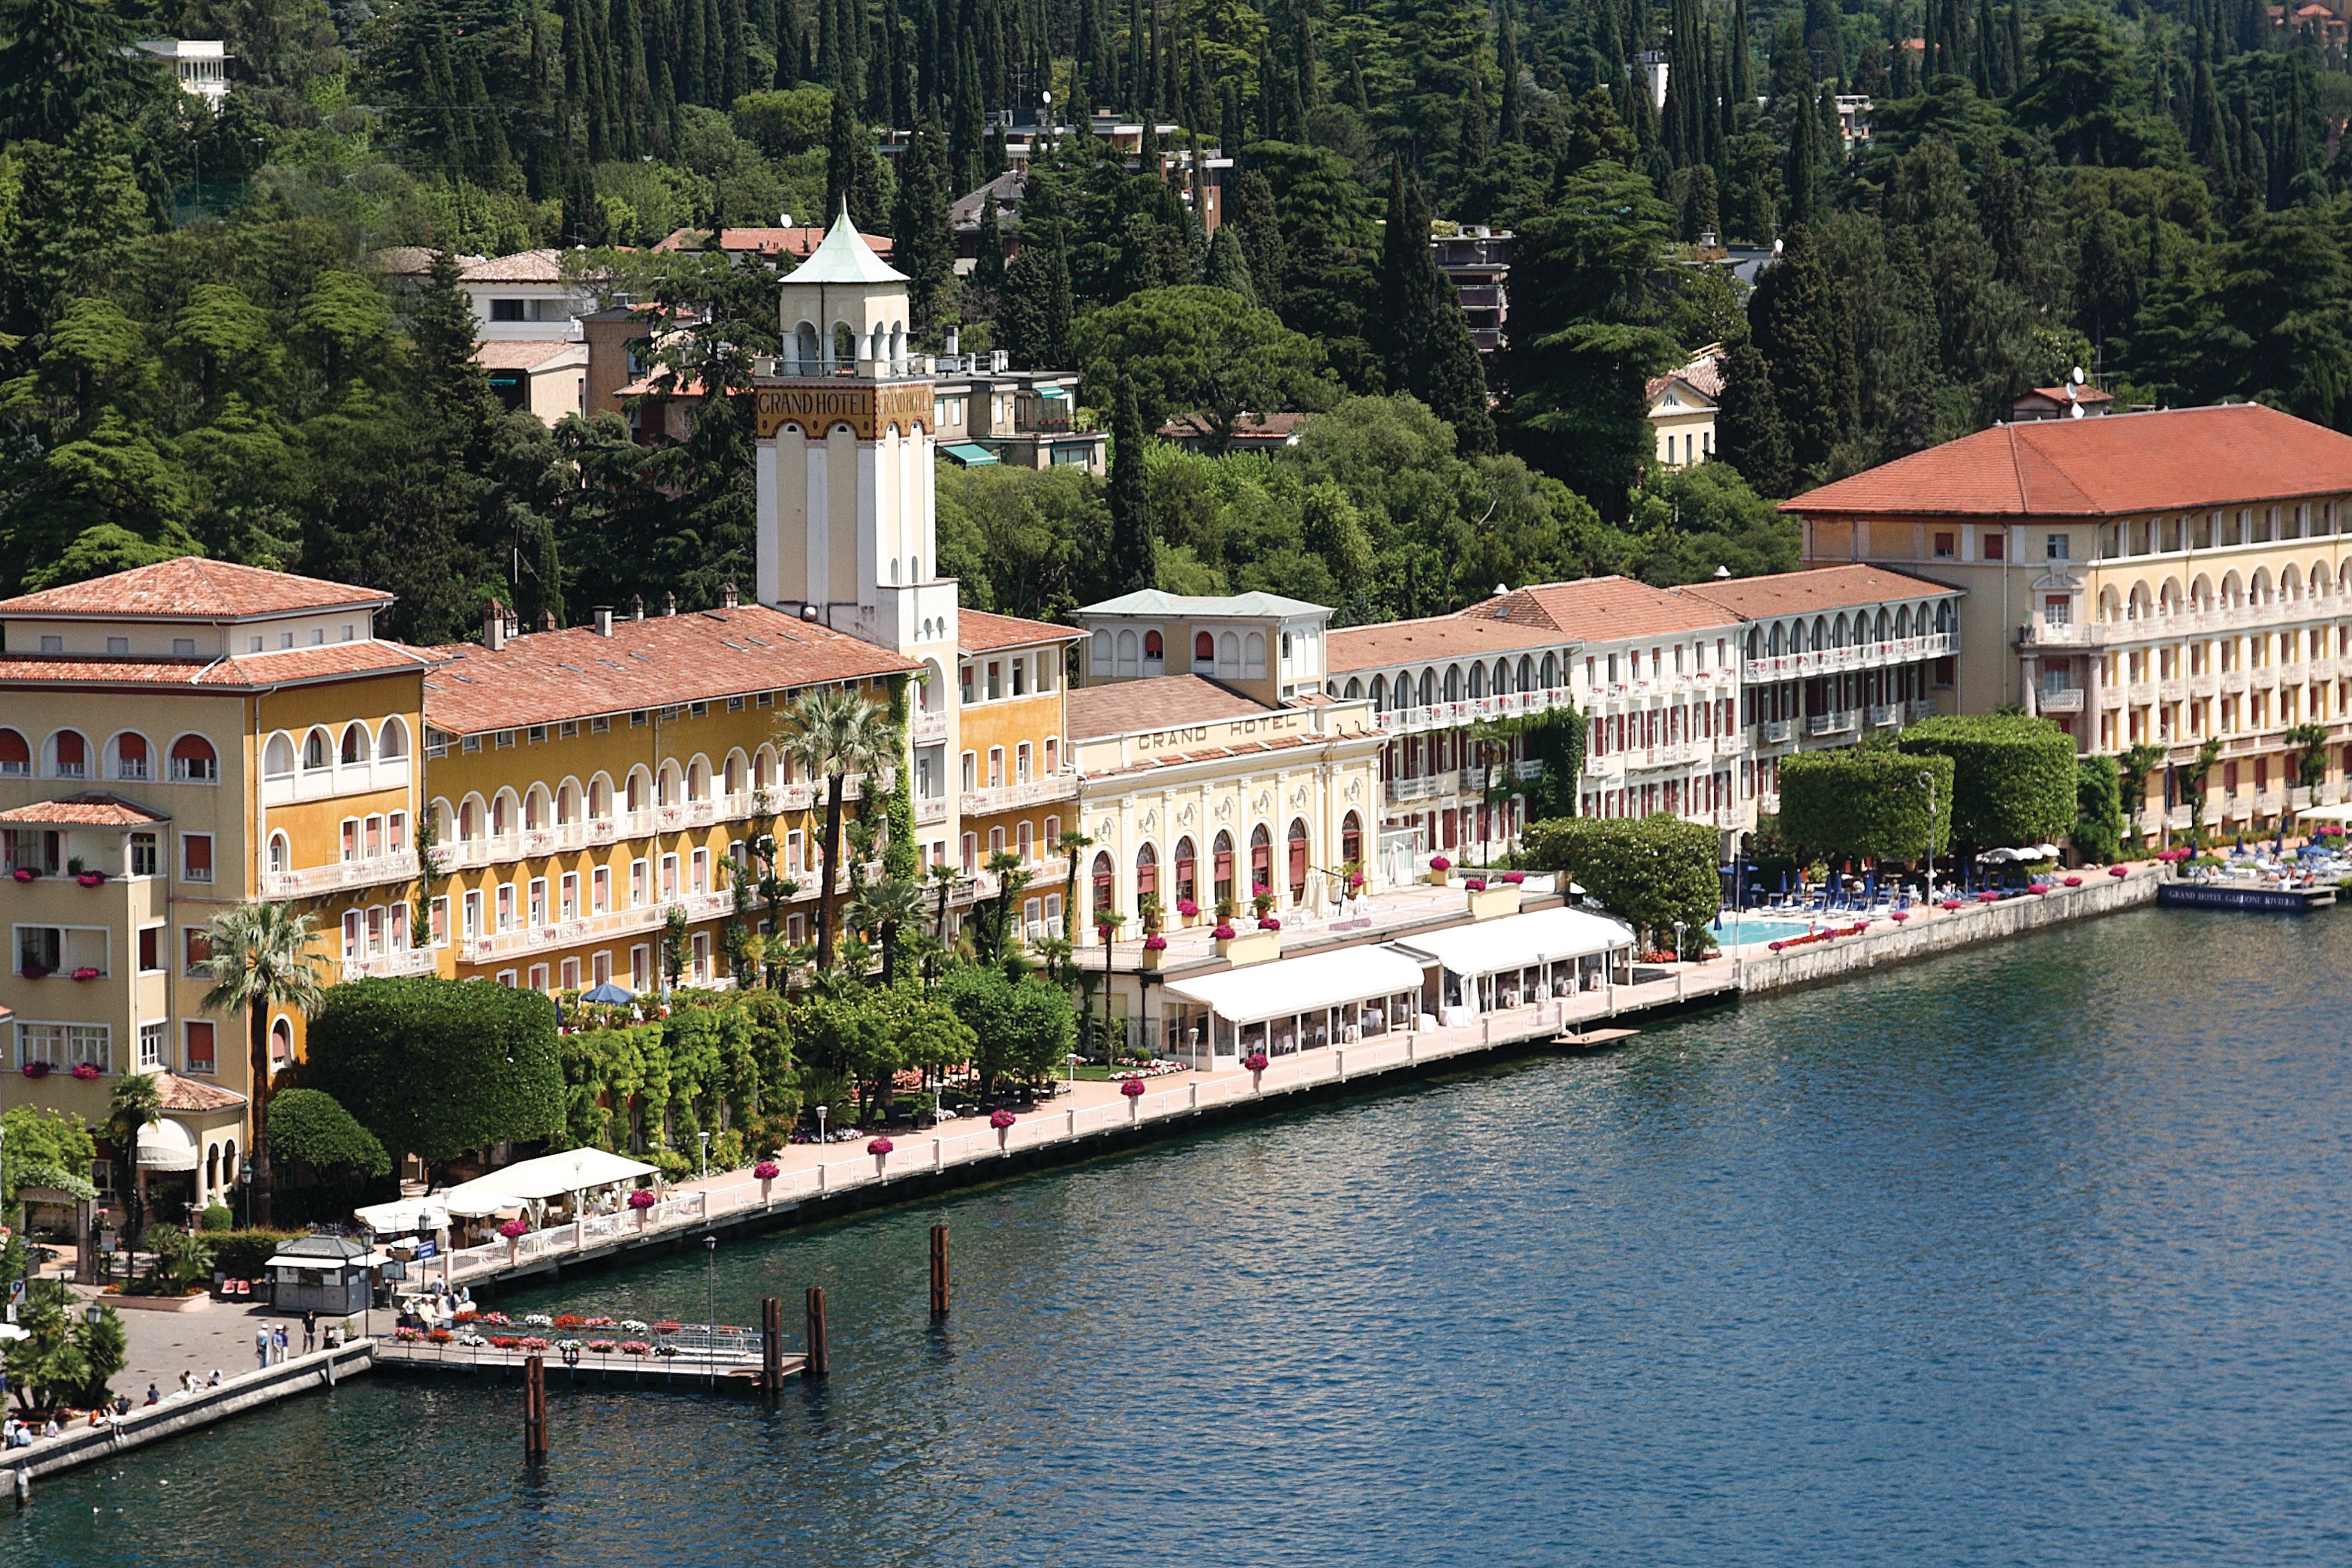 The 19th century Grand Hotel Gardone Riviera hotel makes for a memorable stay